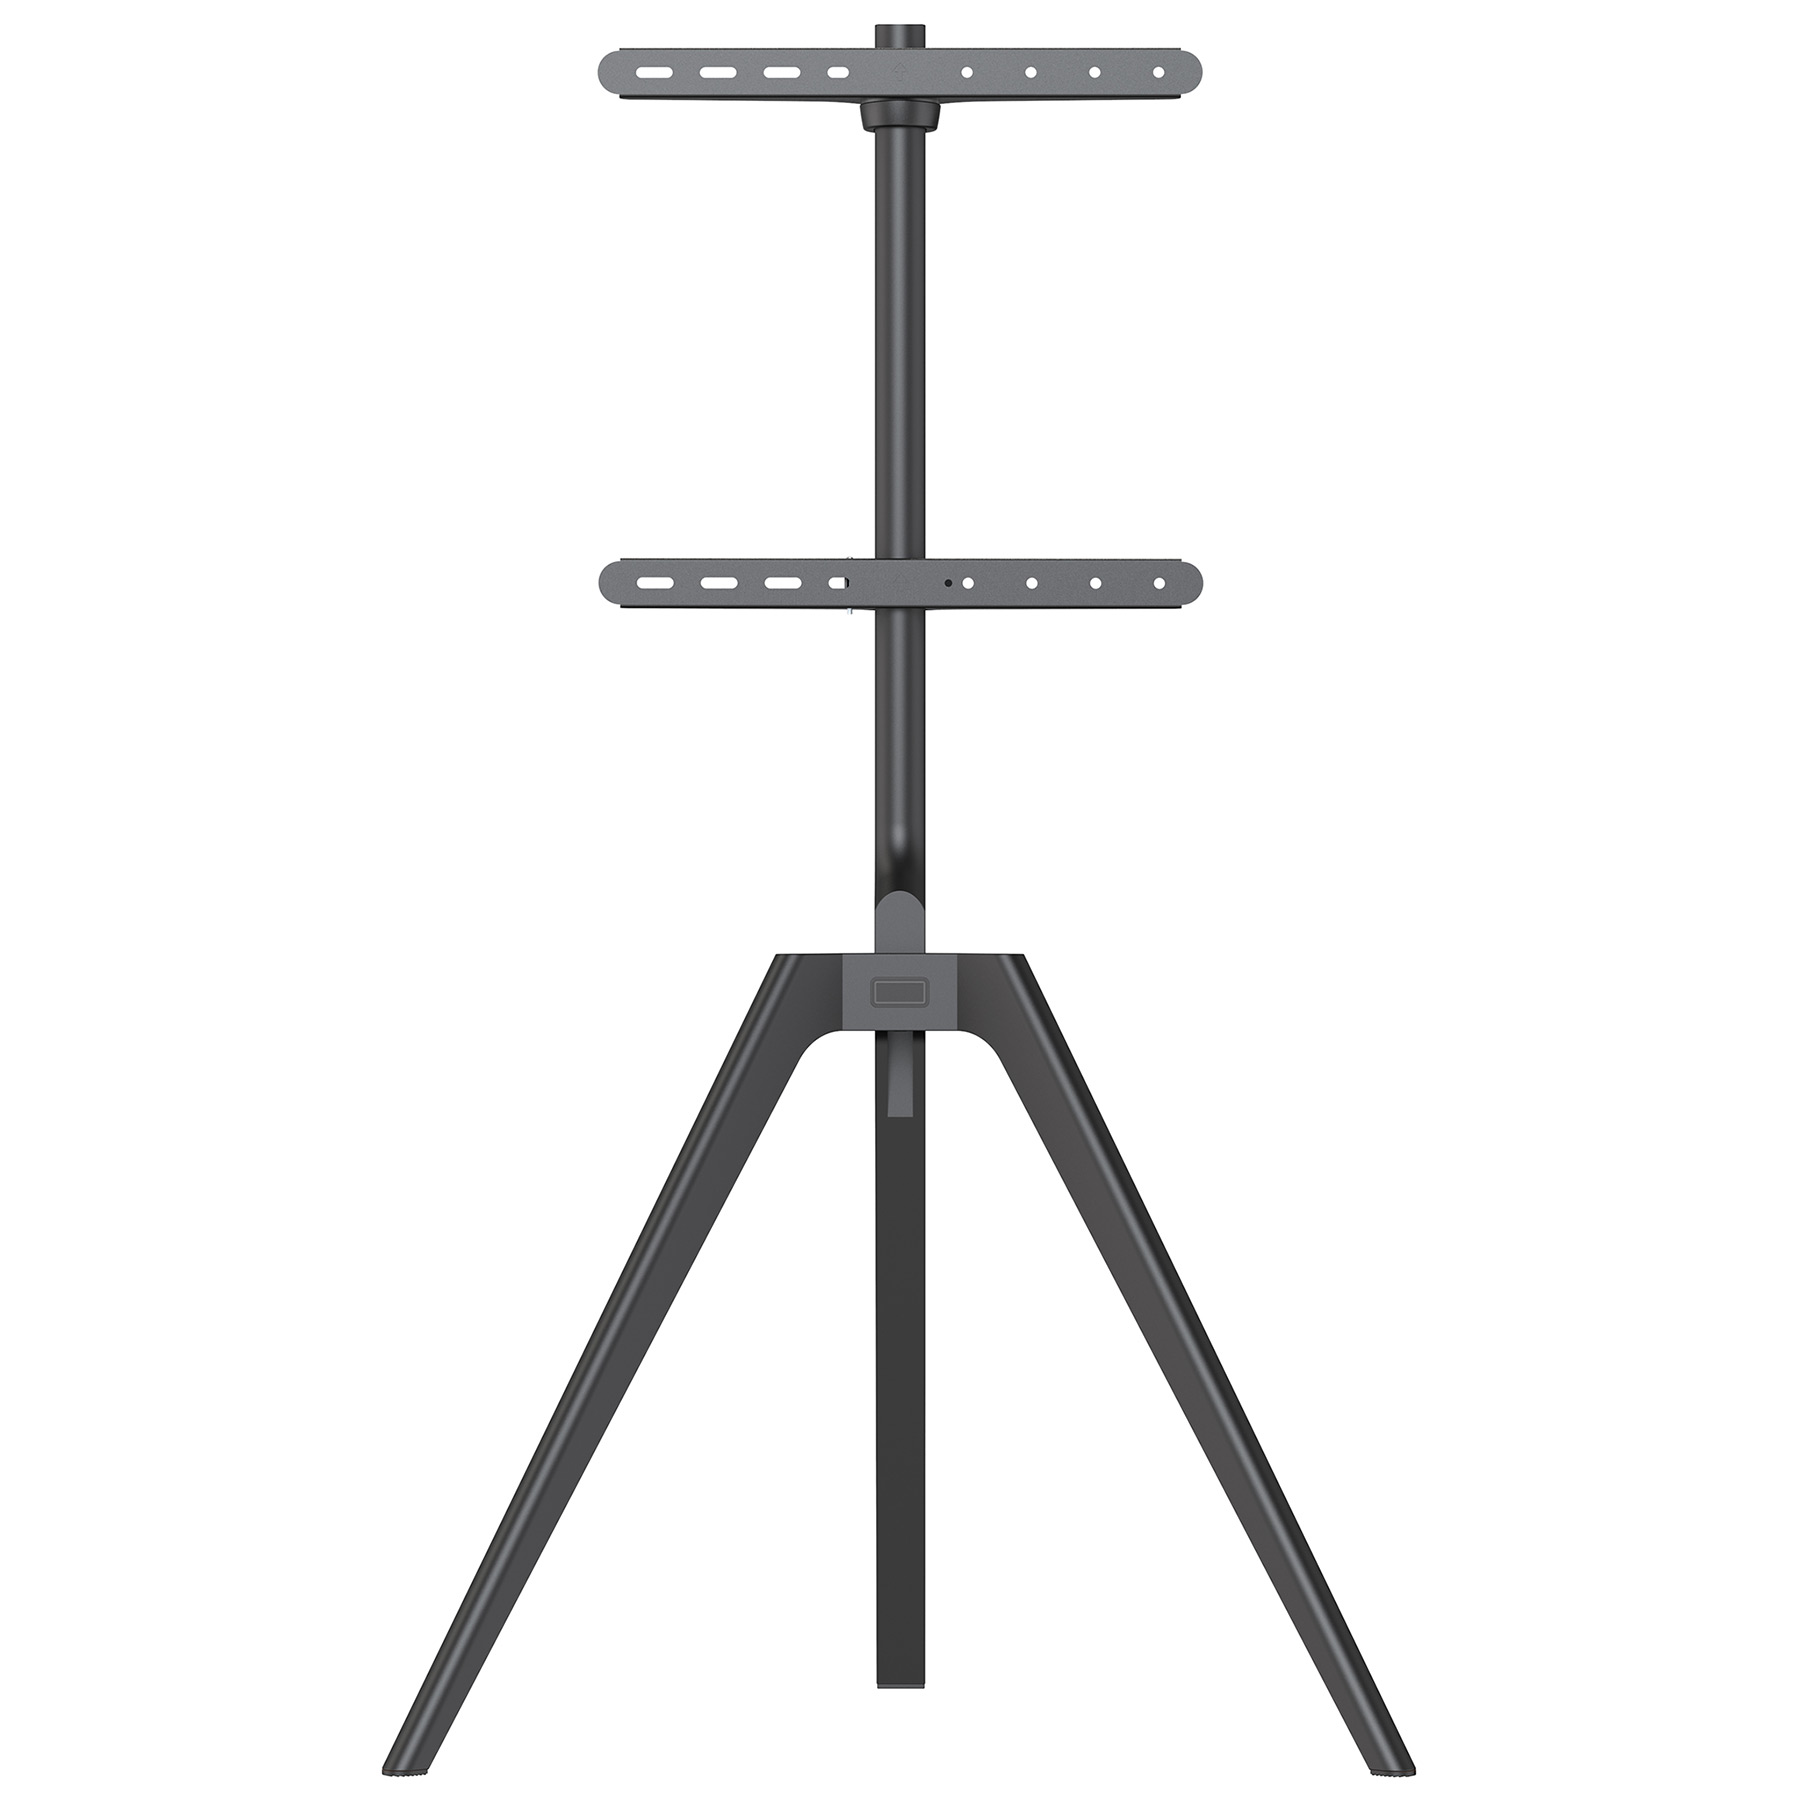 Image of TTAP TRIPOD BLACK Tripod Easel Style Stand with VESA Mount in Black Wo